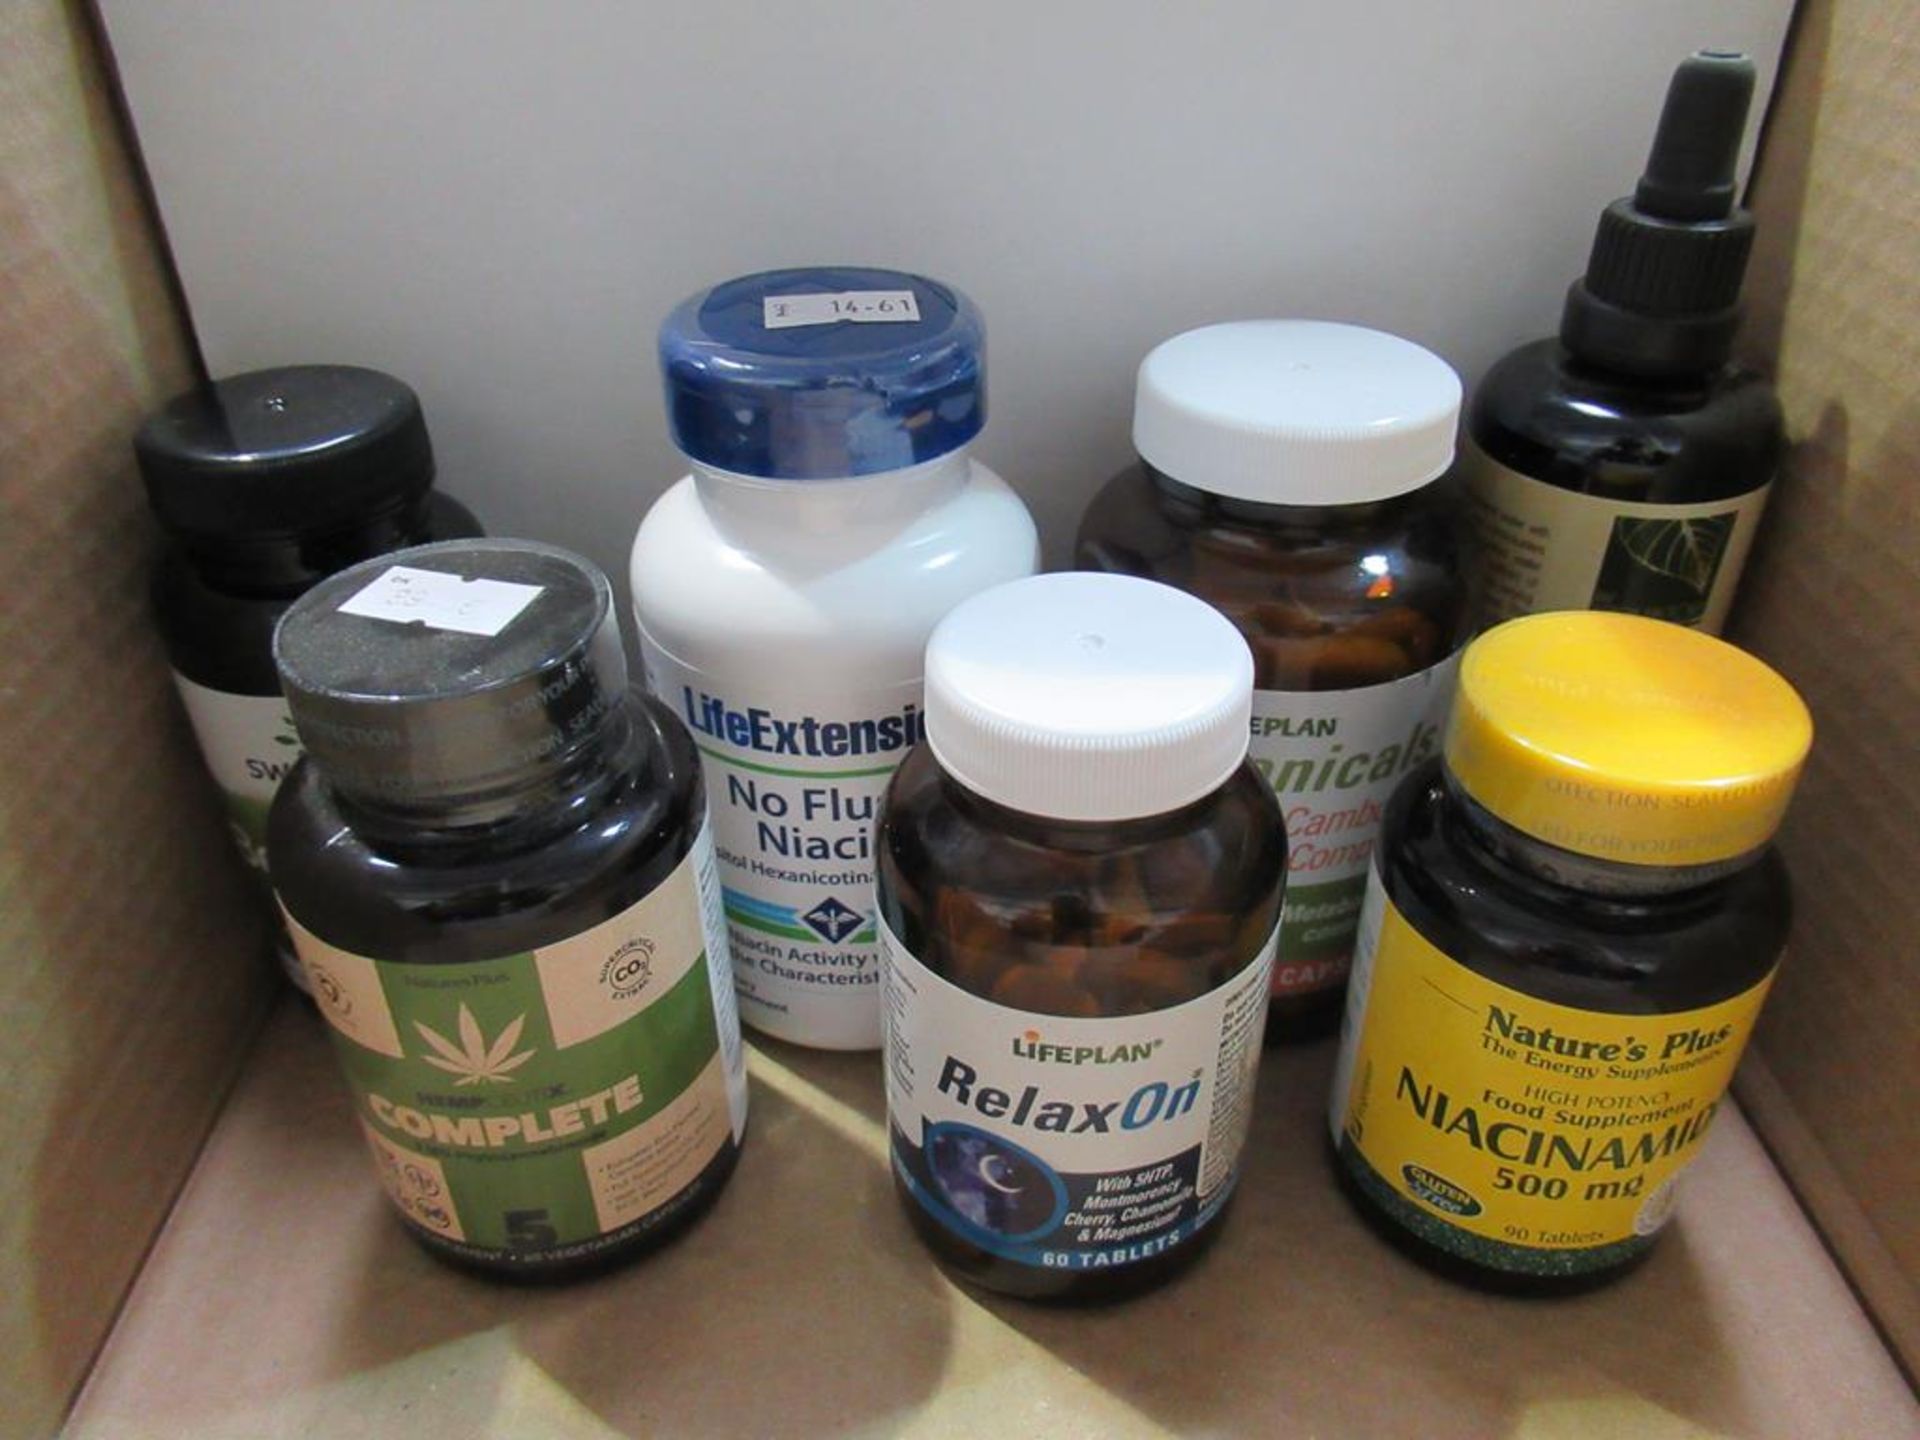 7 supplements to include Lifeplan Relax On, Botanicals Garcinia Cambogia complex, Natures Plus Niaci